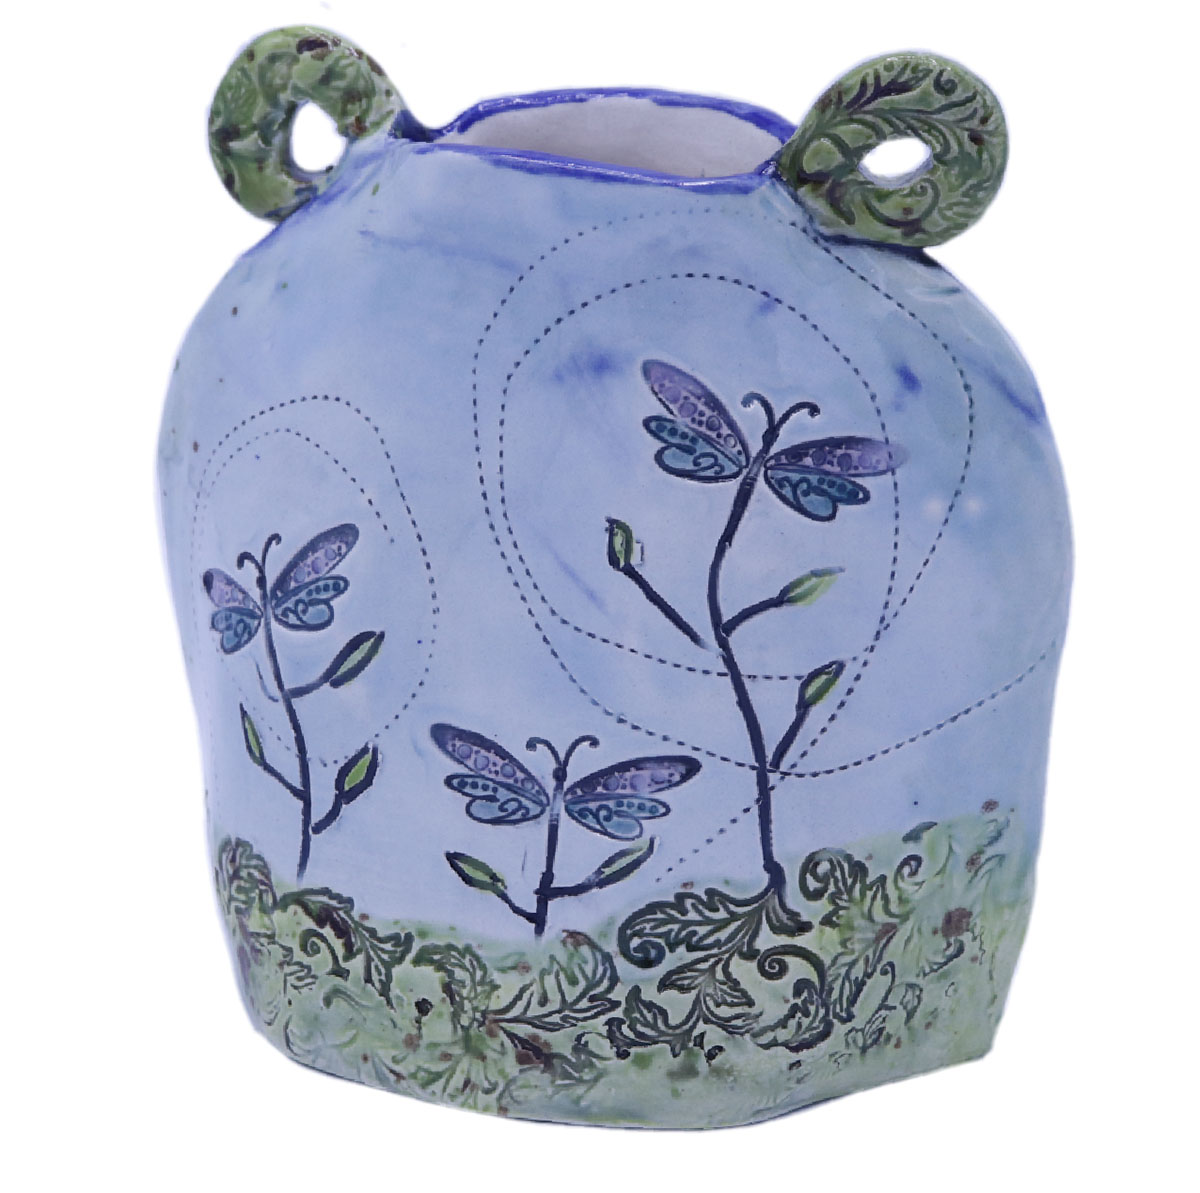 MARIA COUNTS - BLUE OVAL VASE W/ THREE PURPLE/BLUE FLOWERS ON FRONT AND BACK - CERAMIC - 6 X 6 1/4 X 3 1/2